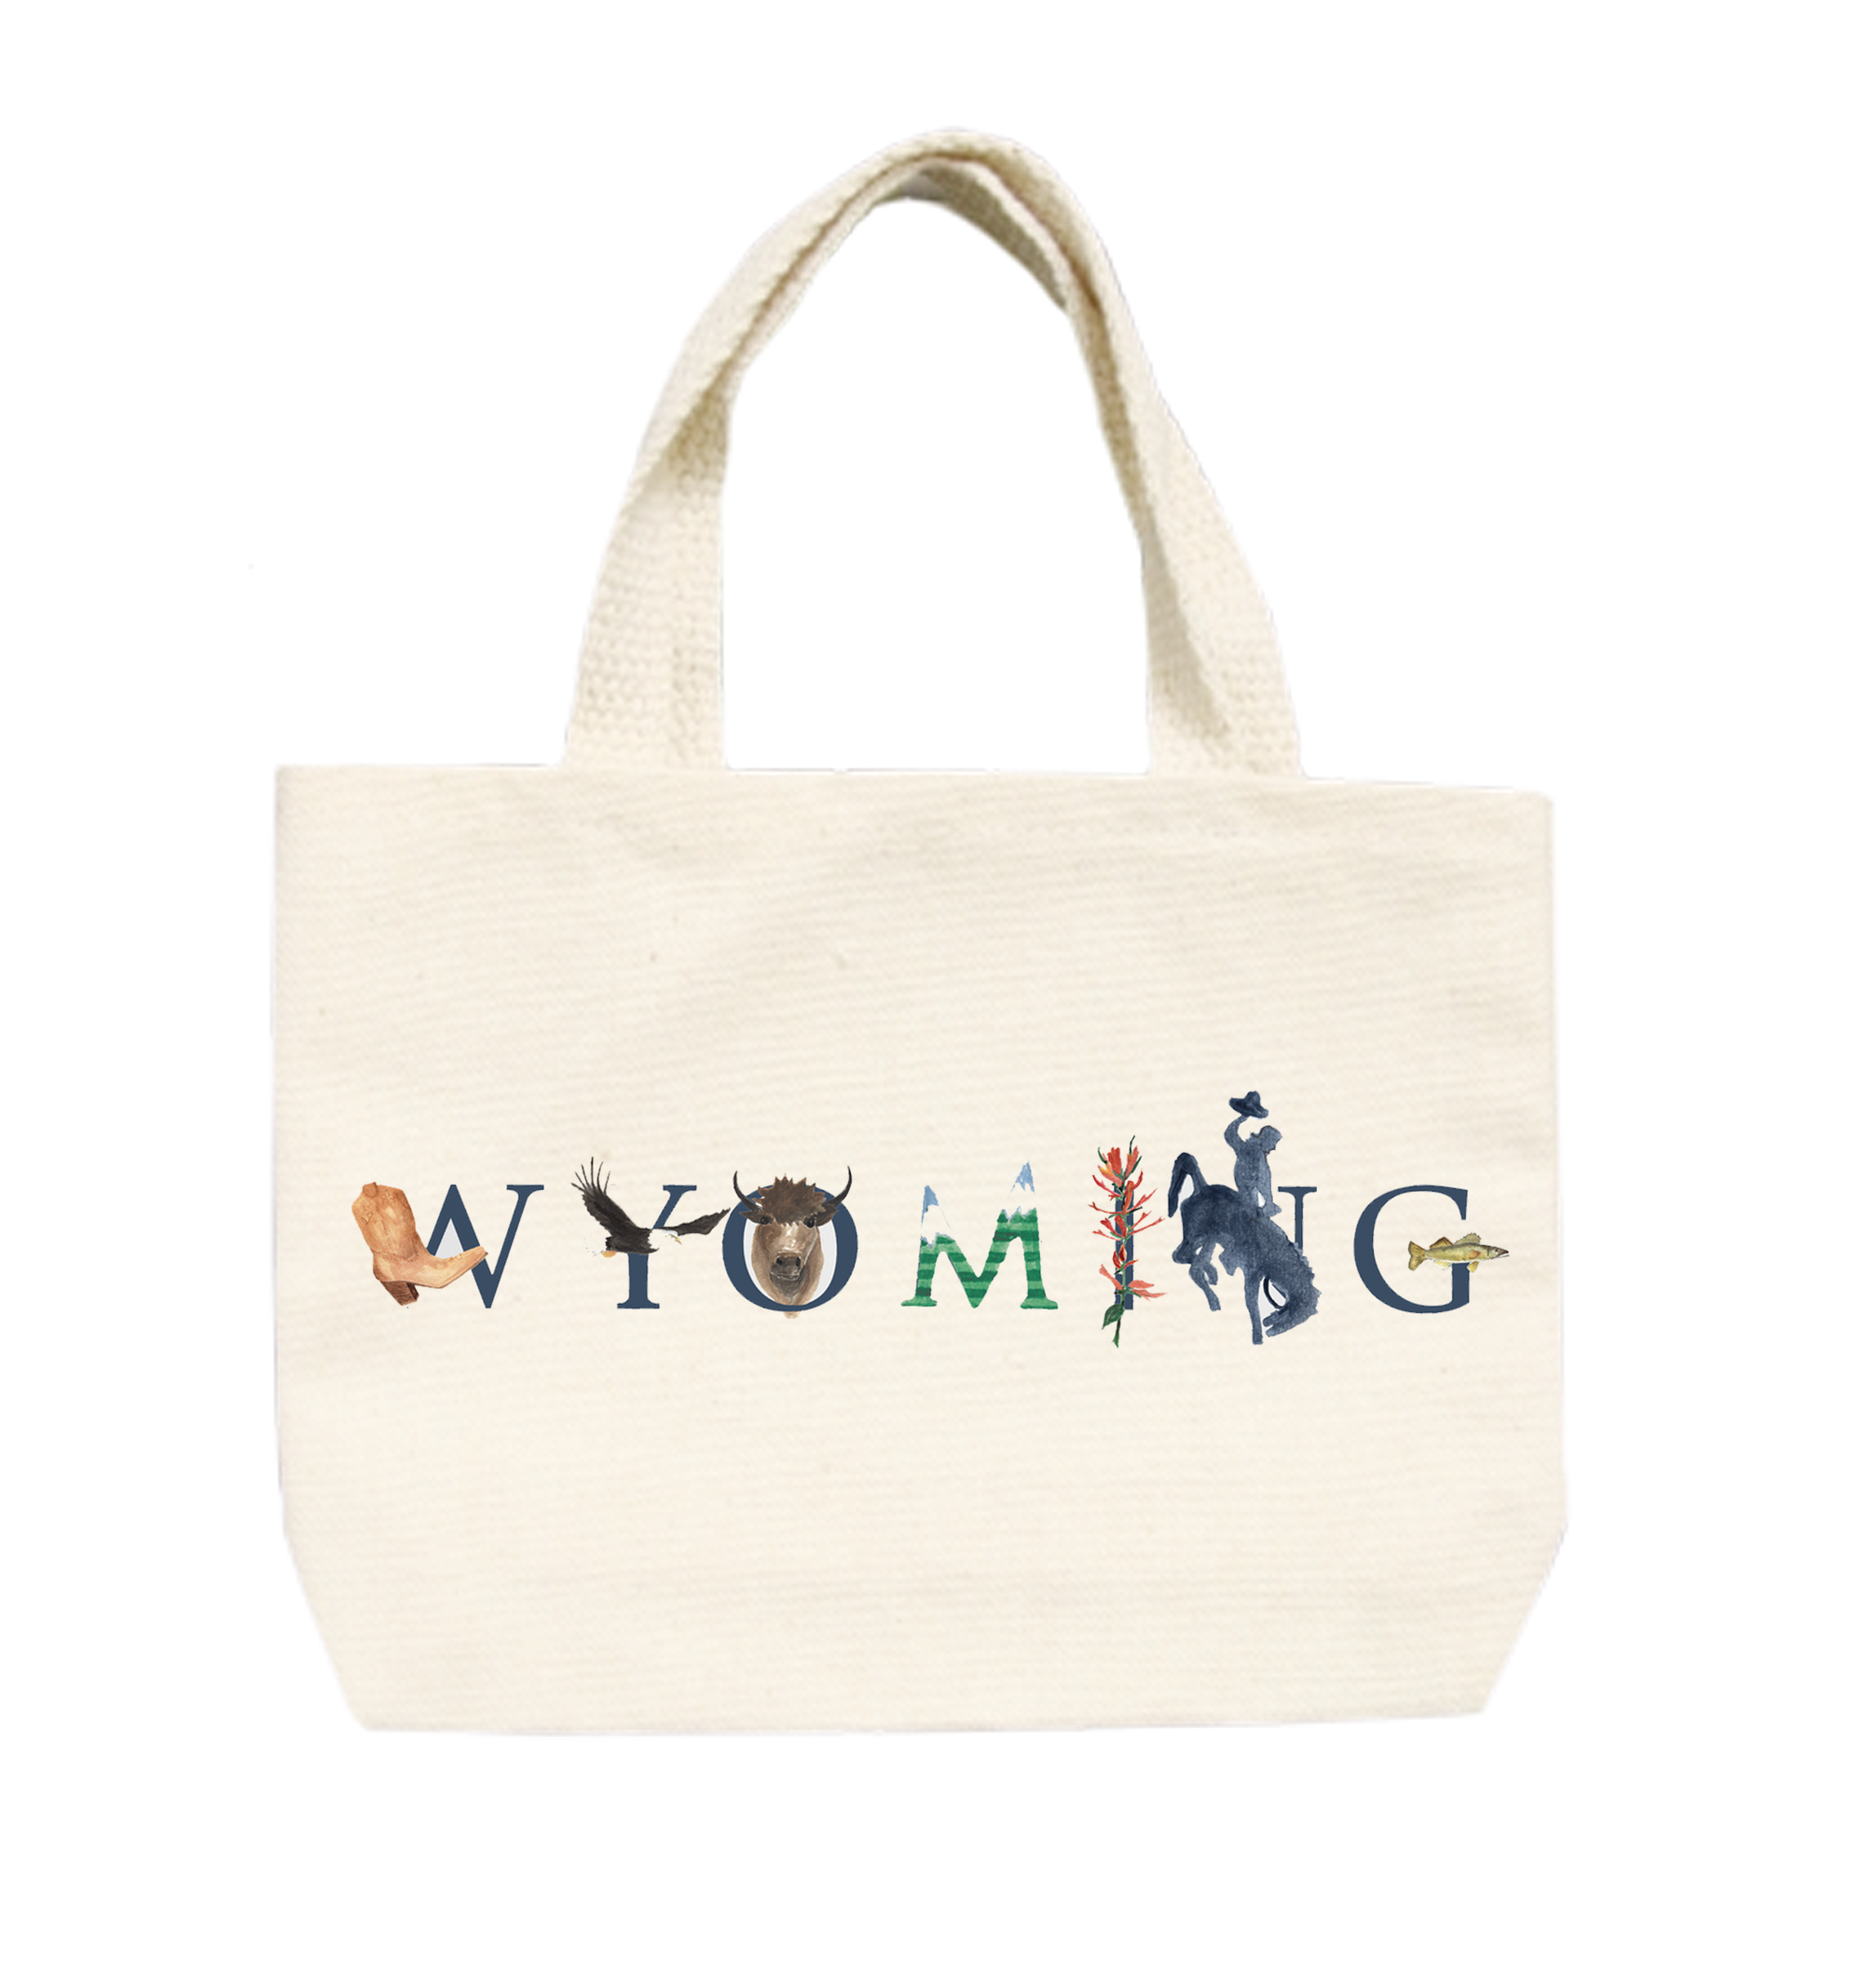 Wyoming small tote